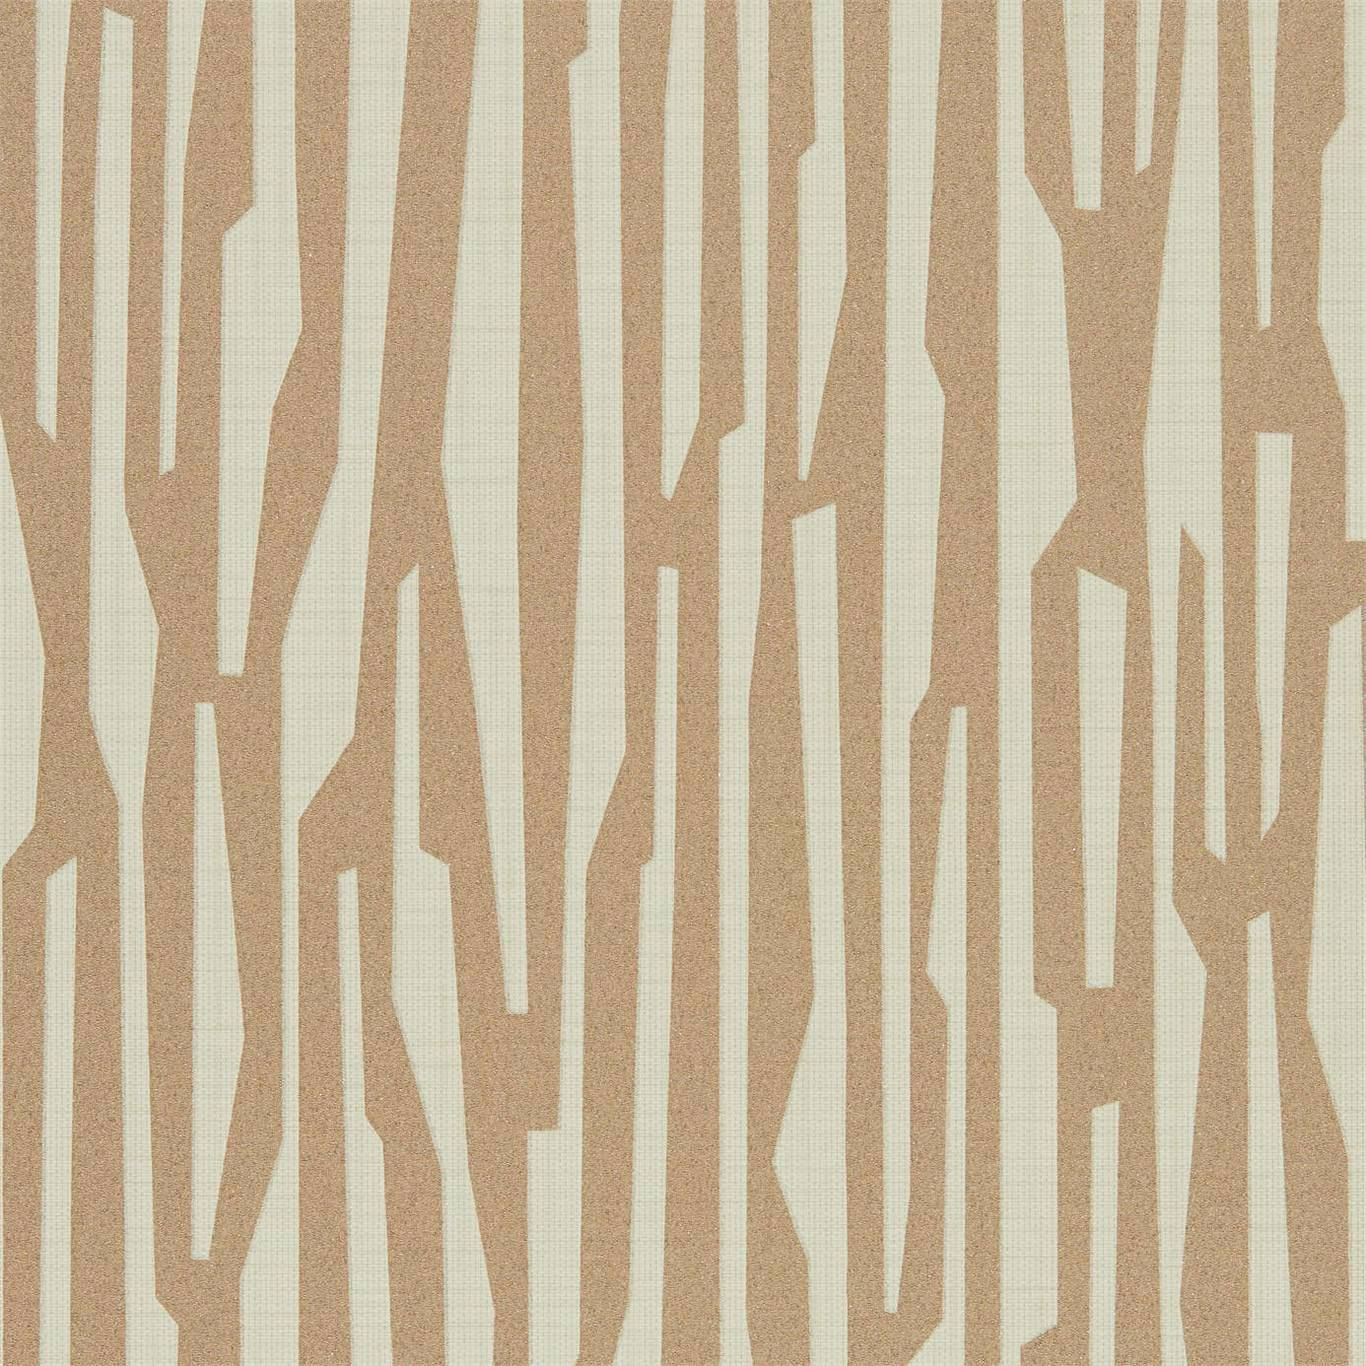 Zendo Rose Gold Wallpaper HM6W112169 by Harlequin